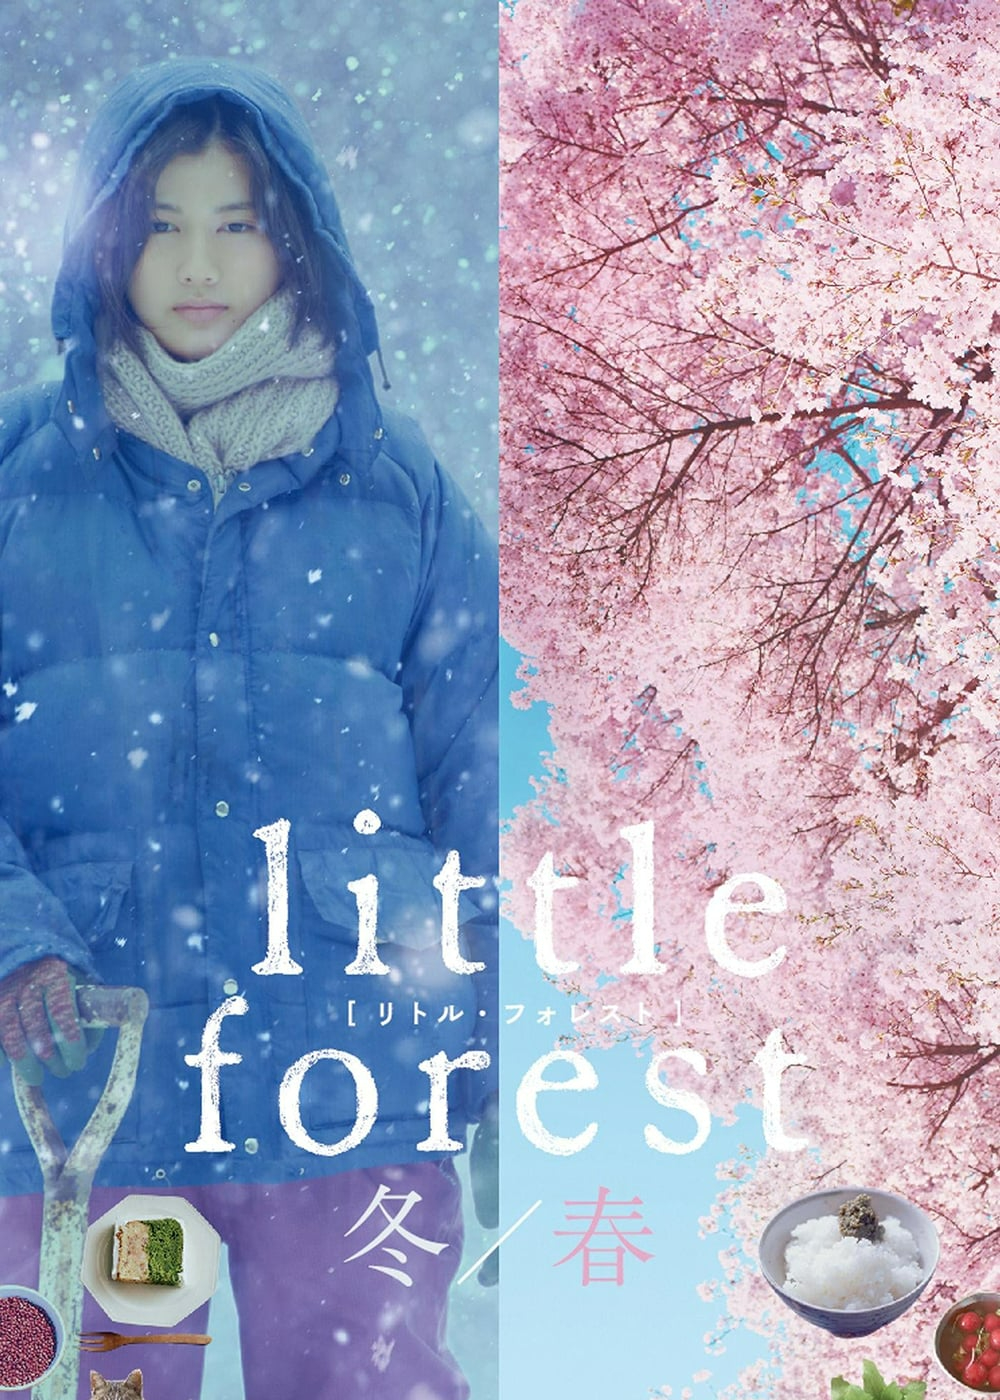 Xem Phim Little Forest: Winter/Spring - Little Forest: Winter/Spring - online truc tuyen vietsub mien phi hinh anh 1